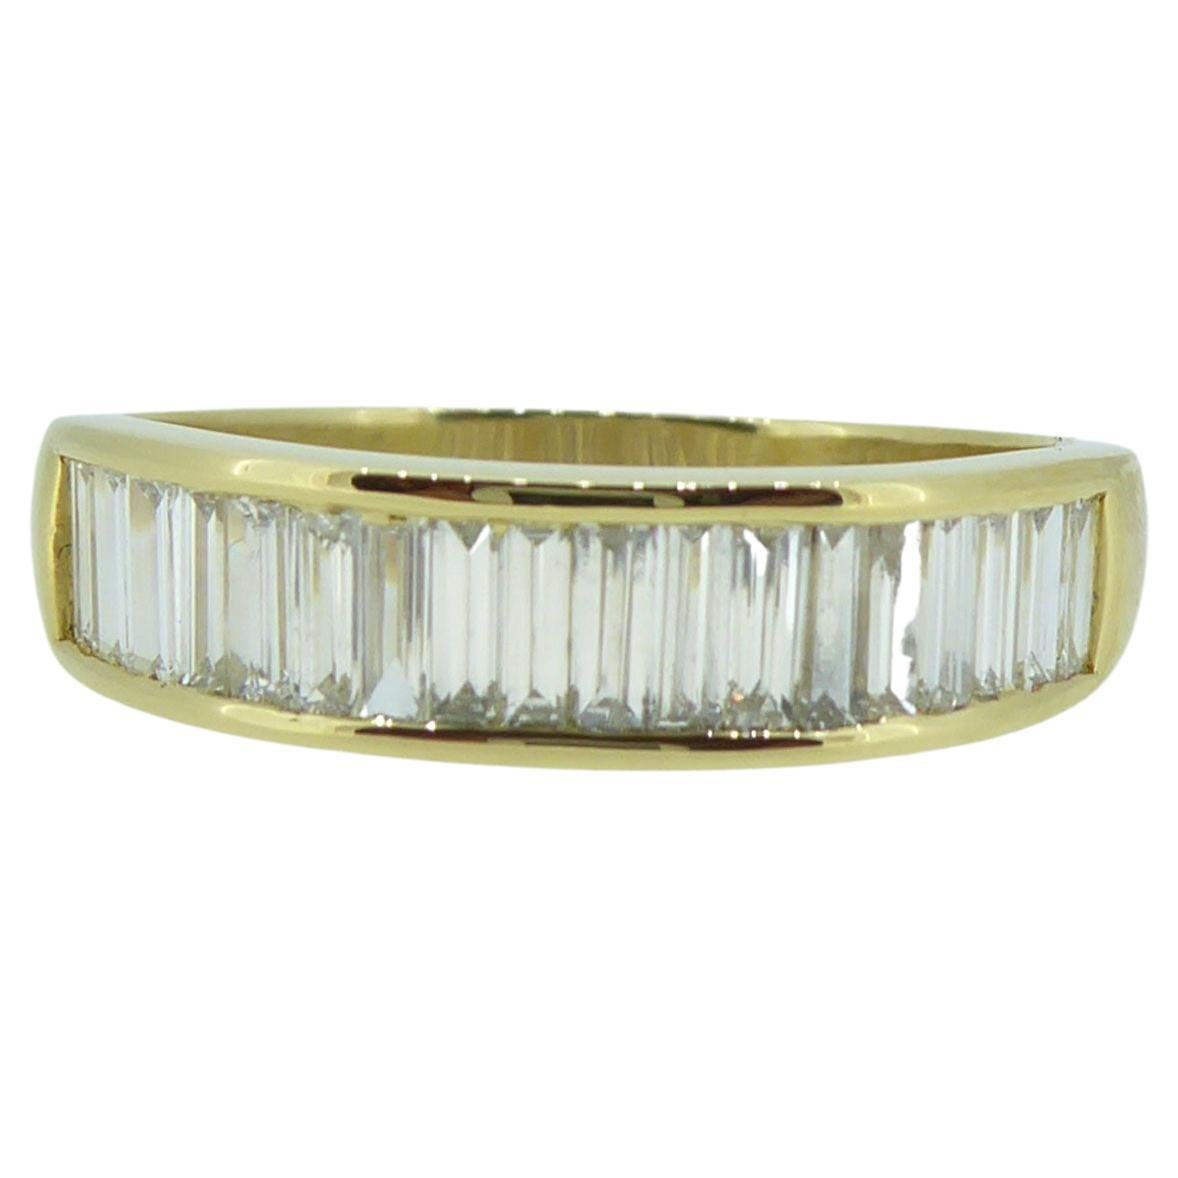 1.62 Carat Baguette Diamond Eternity or Wedding Ring in 18ct Yellow Gold